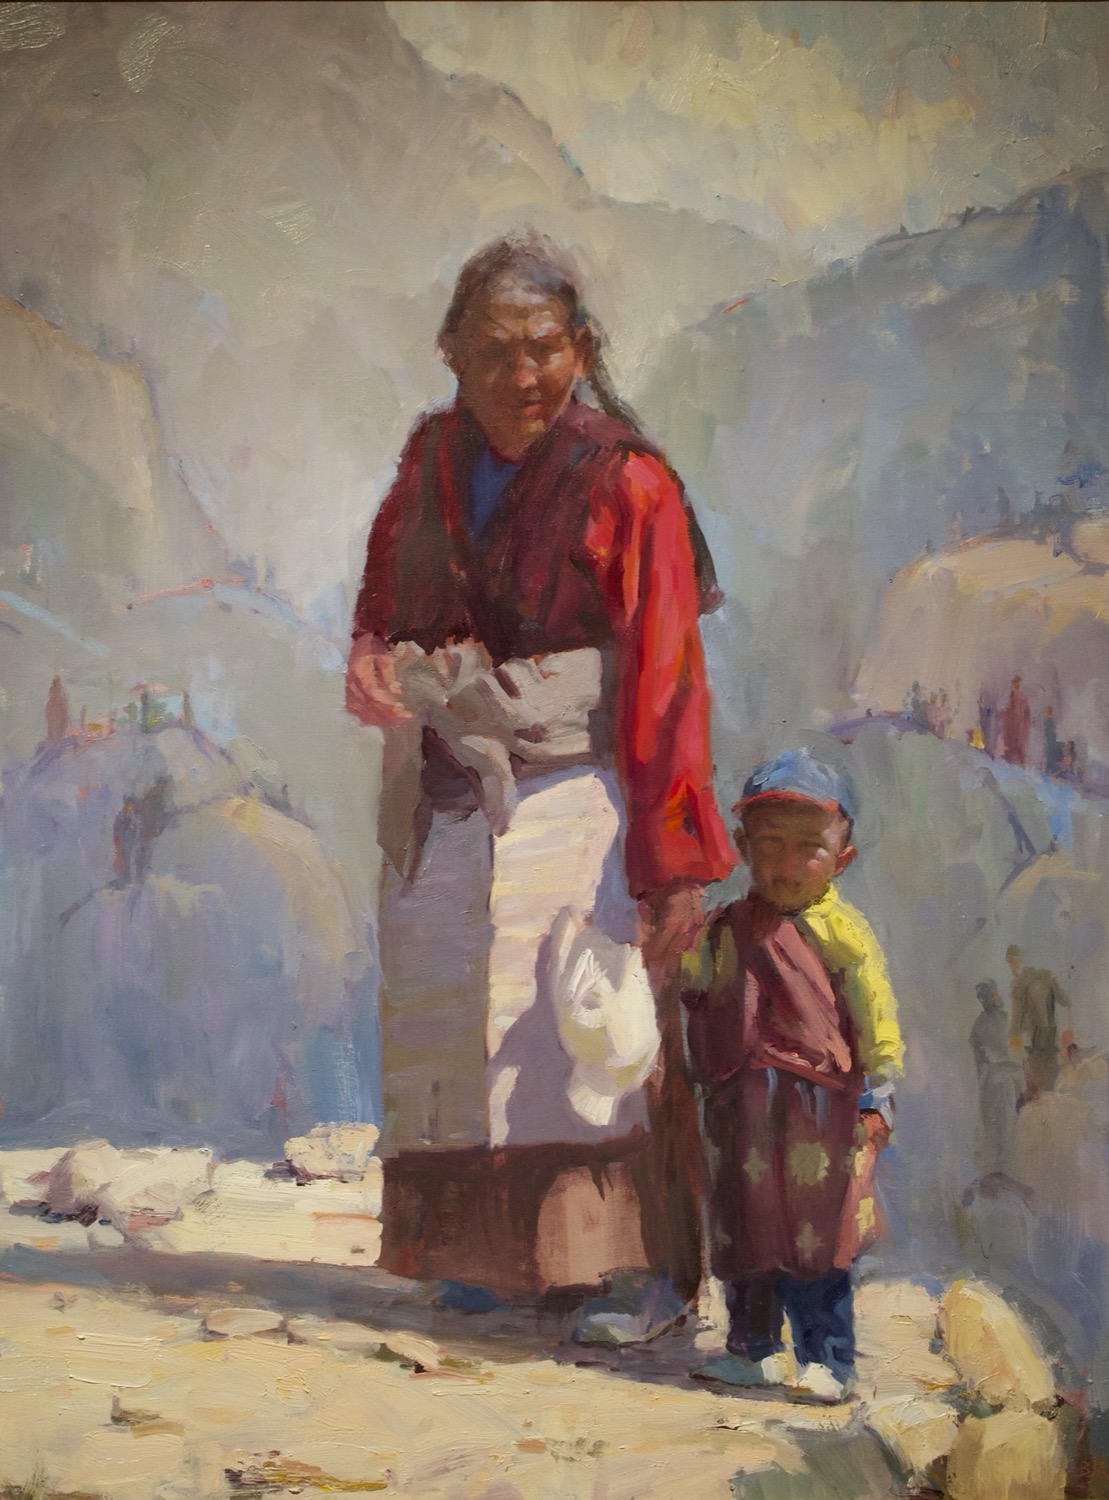 Cat. No. 976 Just Grandma and Me, Shoton Festival, Tibet 40”x30”, Oil on Canvas 2013 1500